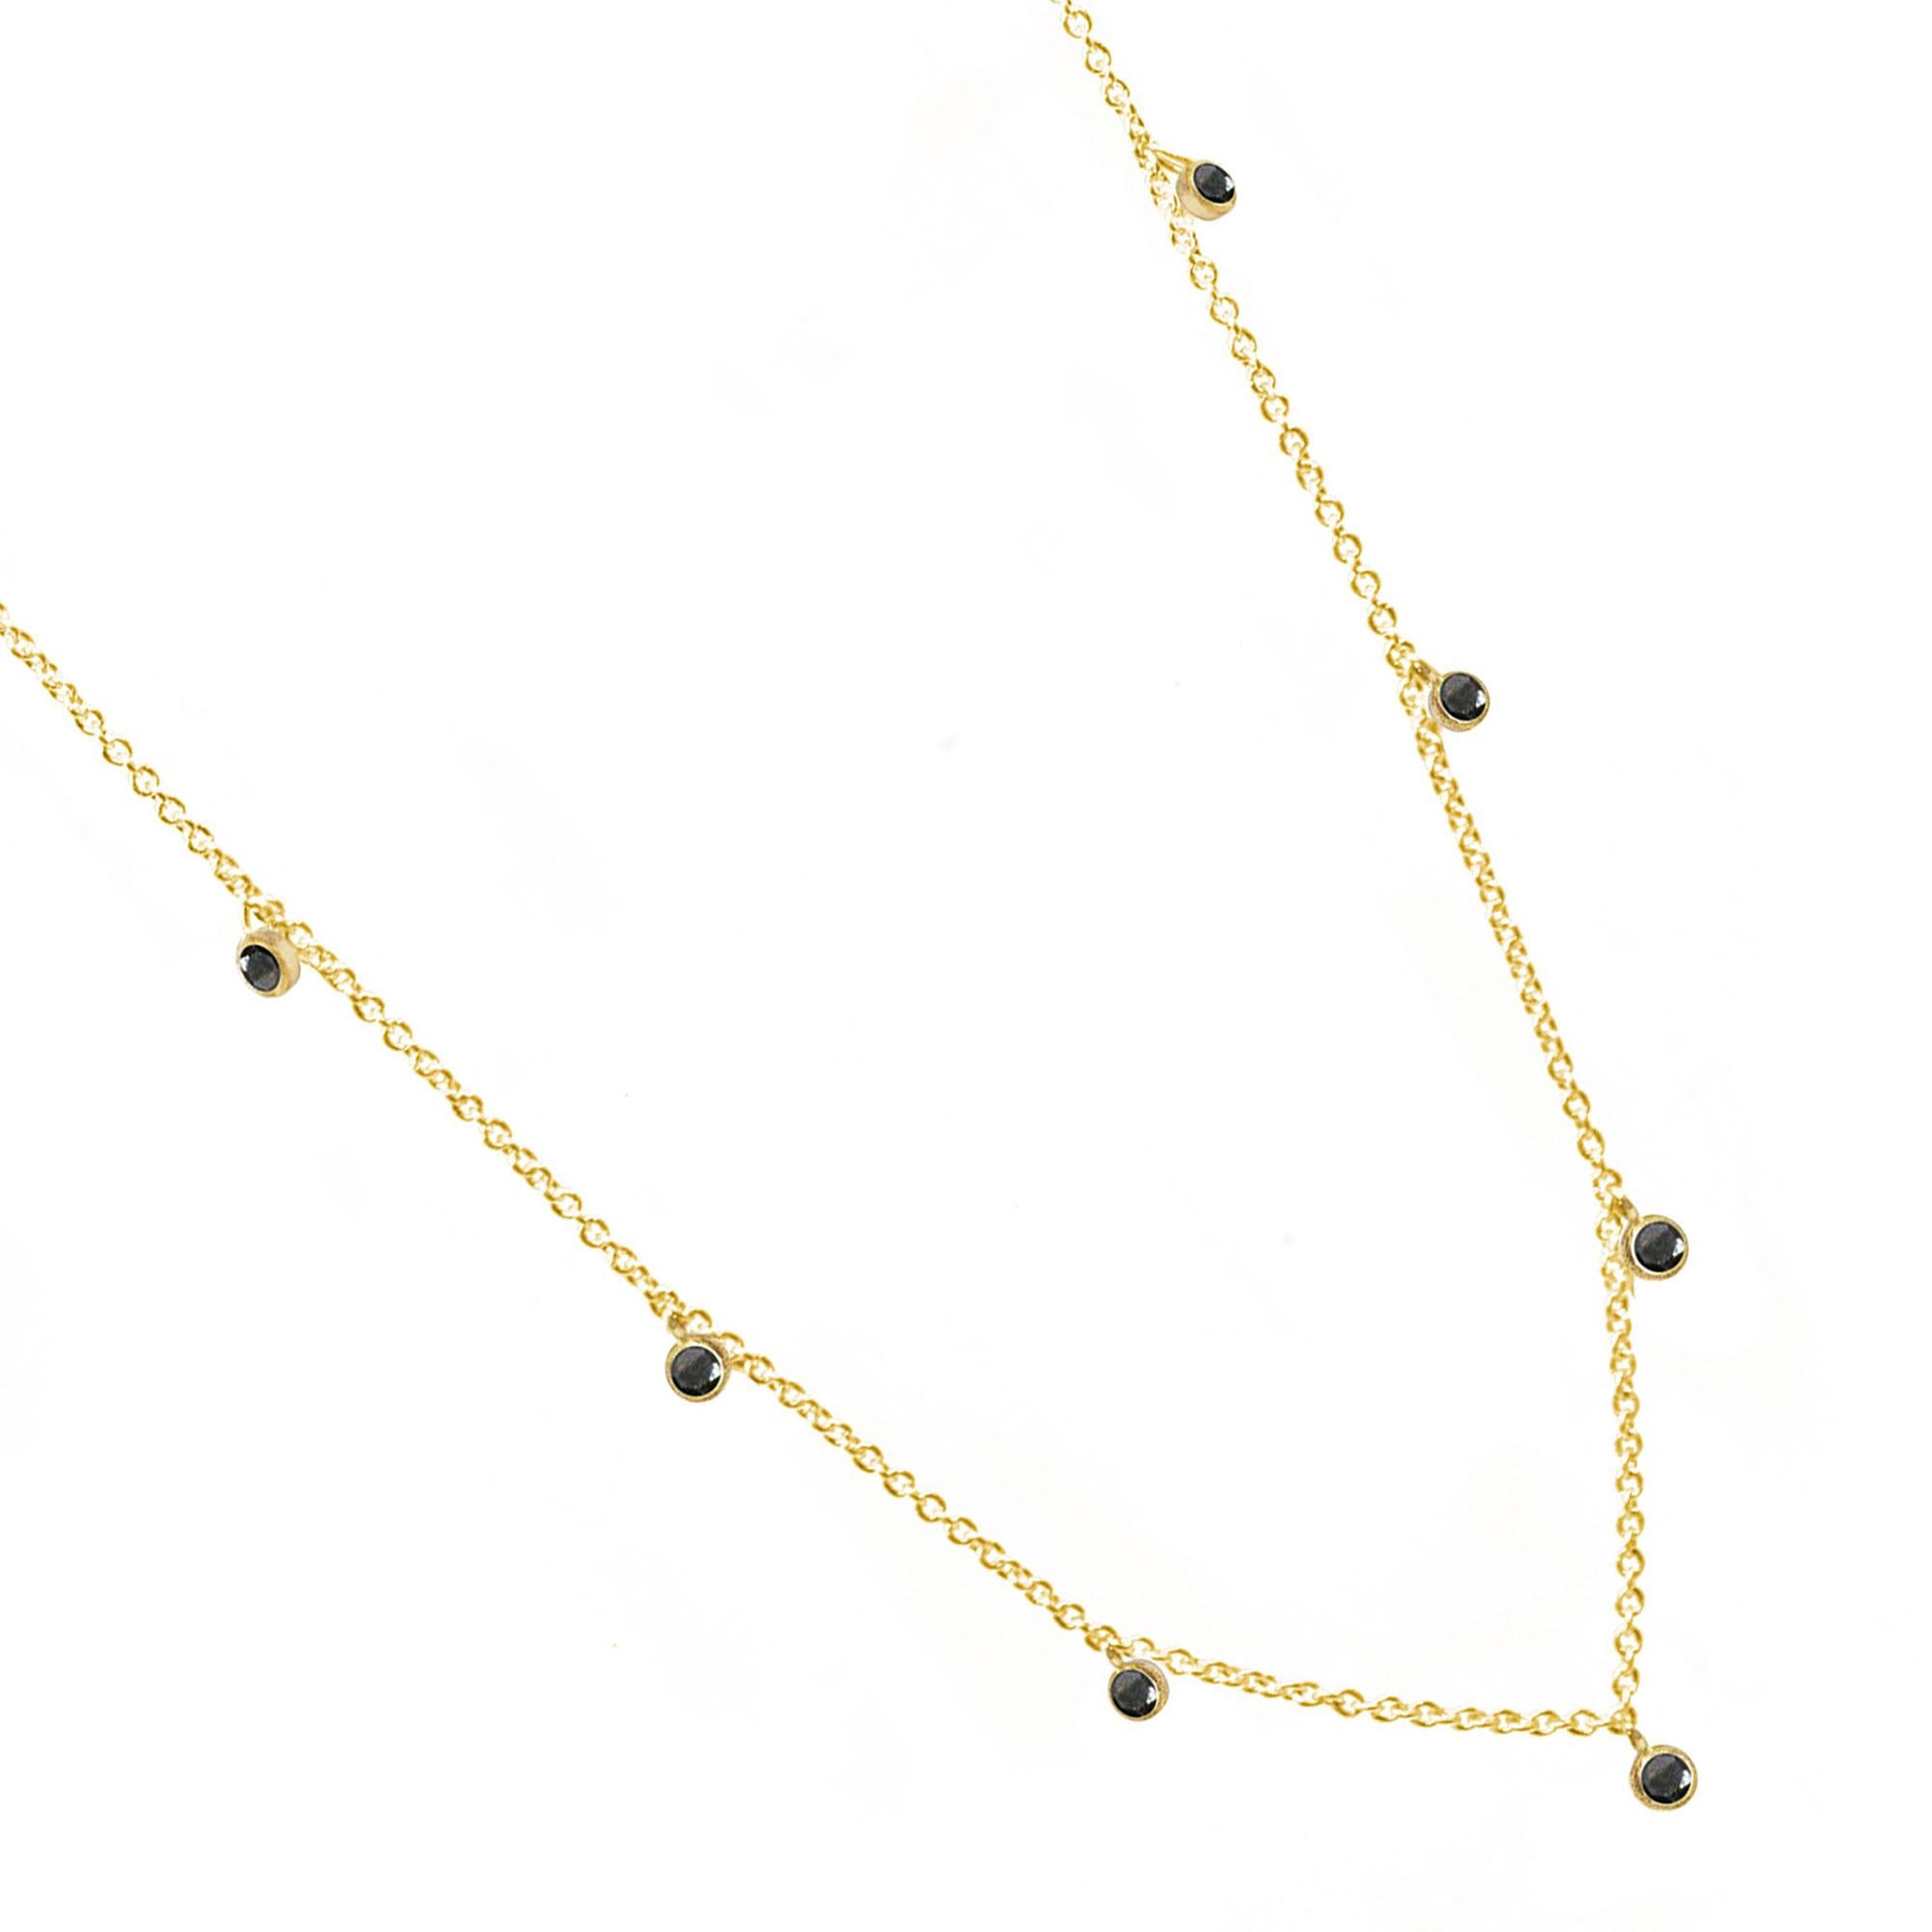 Made with diamond rimmed in gold, our Forged Gold Necklace provides an effortless, yet fashionable style.

Details
Metal: 18K Yellow Gold
Diamond carat: 0.3
Length: 15-17''
Diamond size: 2.5mm